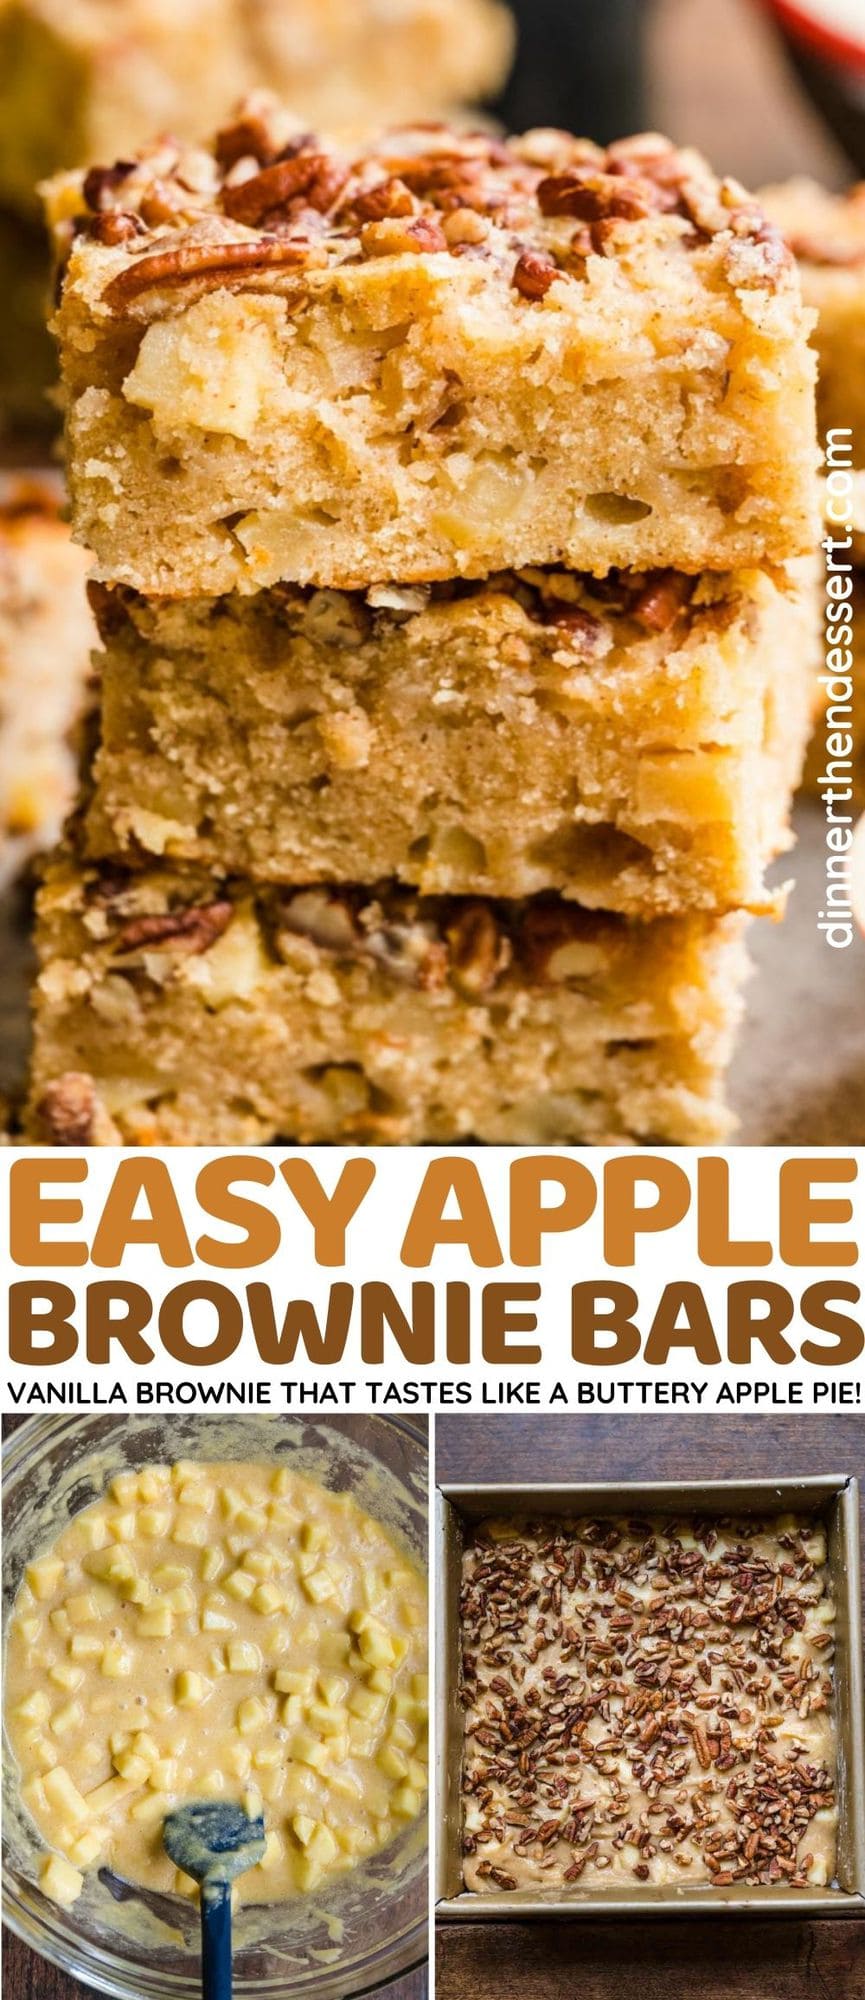 Apple Brownie Bars three in a stack on sheet pan collage